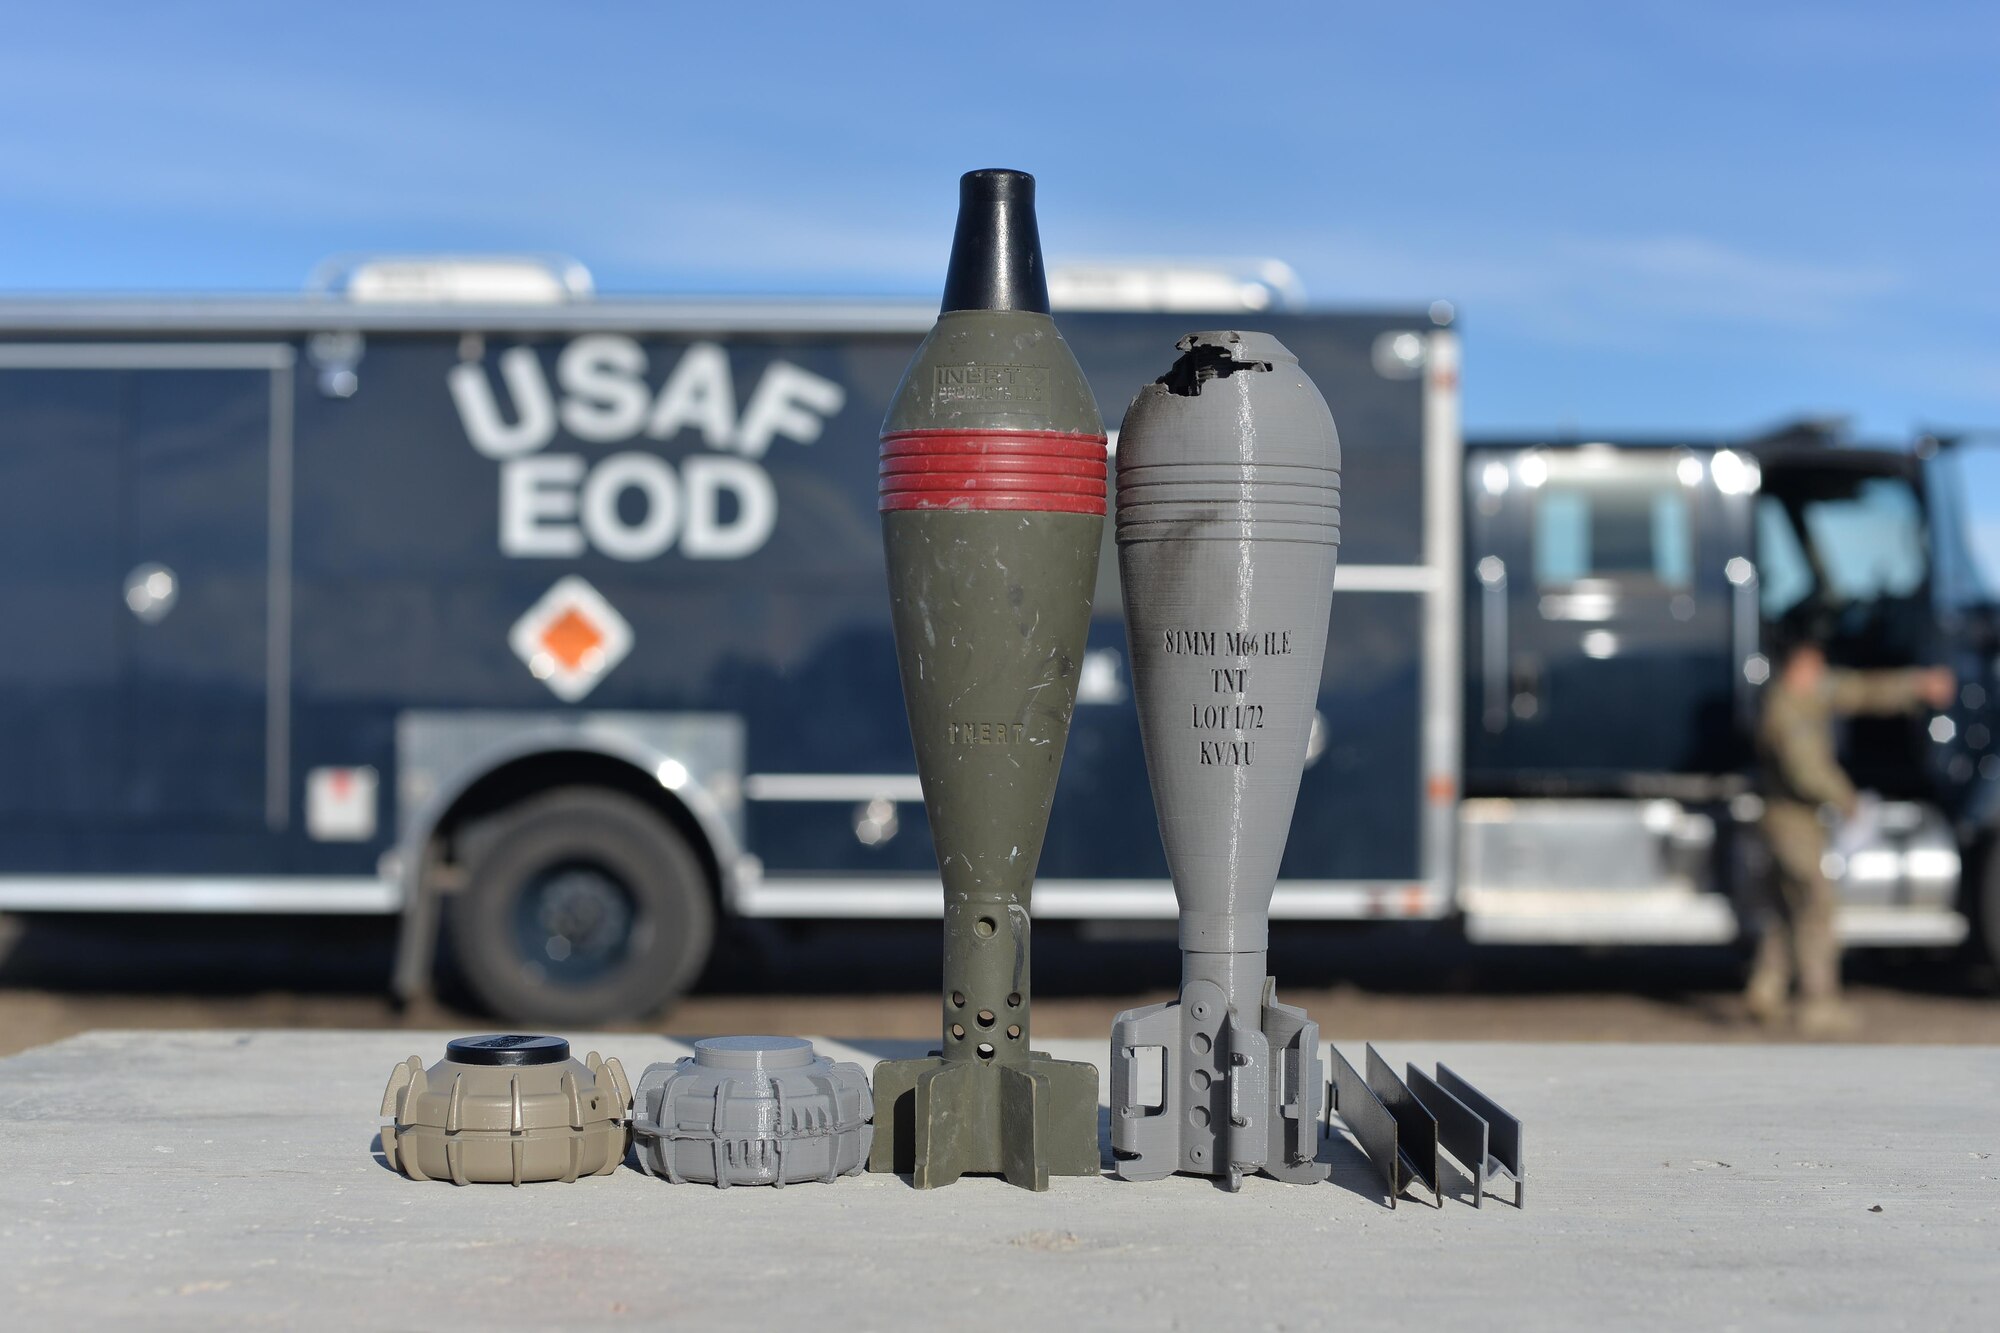 The 341st Civil Engineer Squadron explosive ordnance disposal unit is now using a 3-D printer to produce training aids that allow for realistic training without having to preserve them for future training. The training aids can now be made at a low cost, allowing more practical training and saving the unit hundreds to thousands of dollars each year. (U.S. Air Force photo/Airman 1st Class Daniel Brosam)